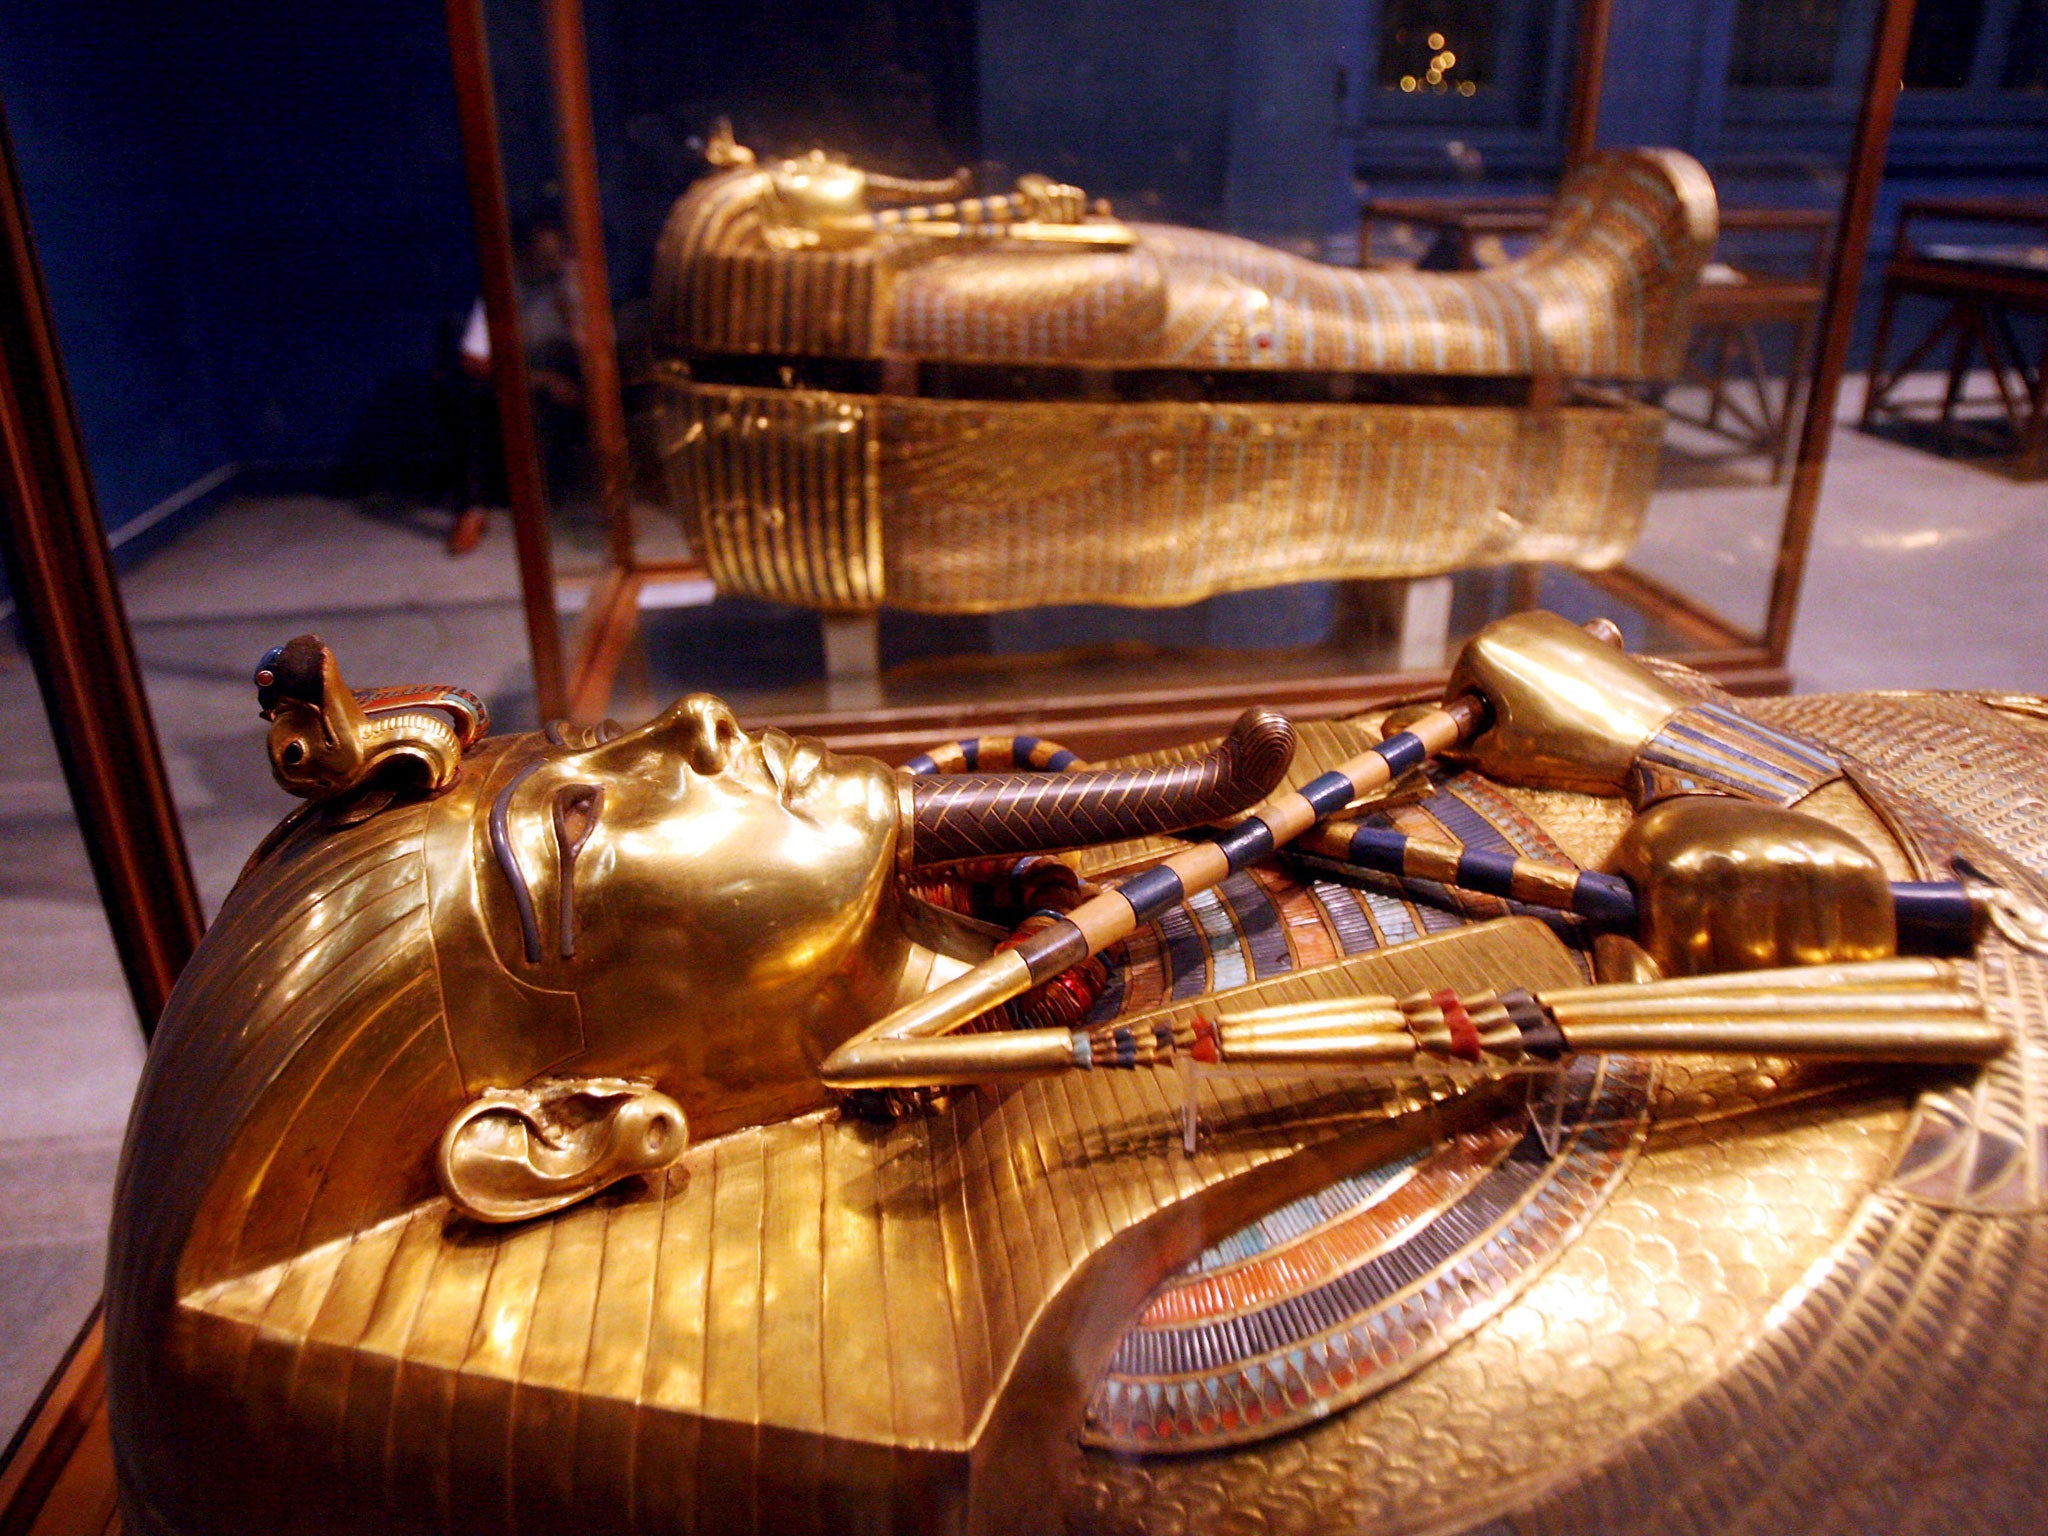 Golden wonder: Now is the time to take advantage of the lack of crowds and visit Cairo's Egyptian Museum